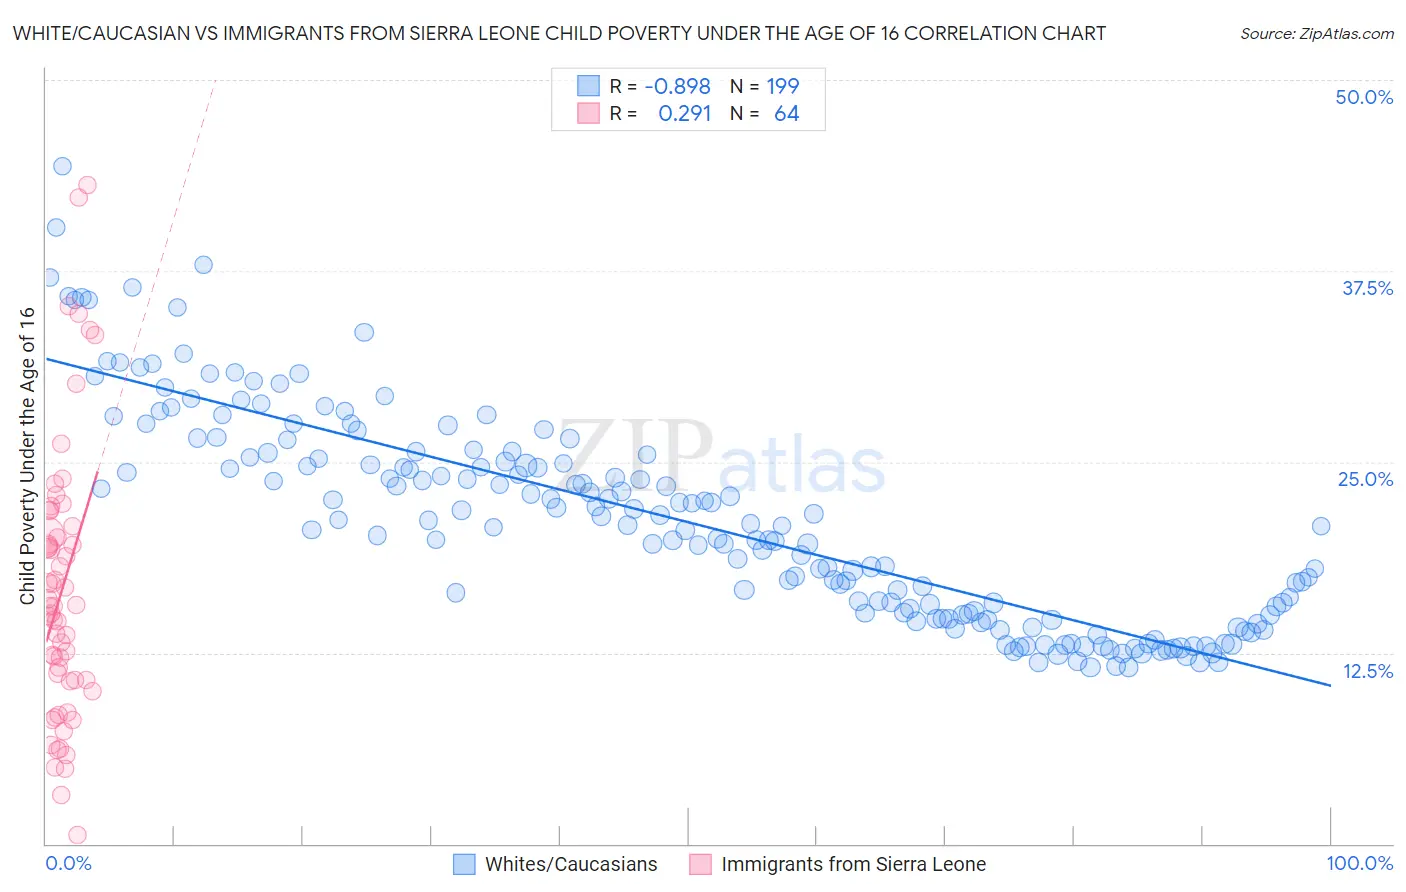 White/Caucasian vs Immigrants from Sierra Leone Child Poverty Under the Age of 16